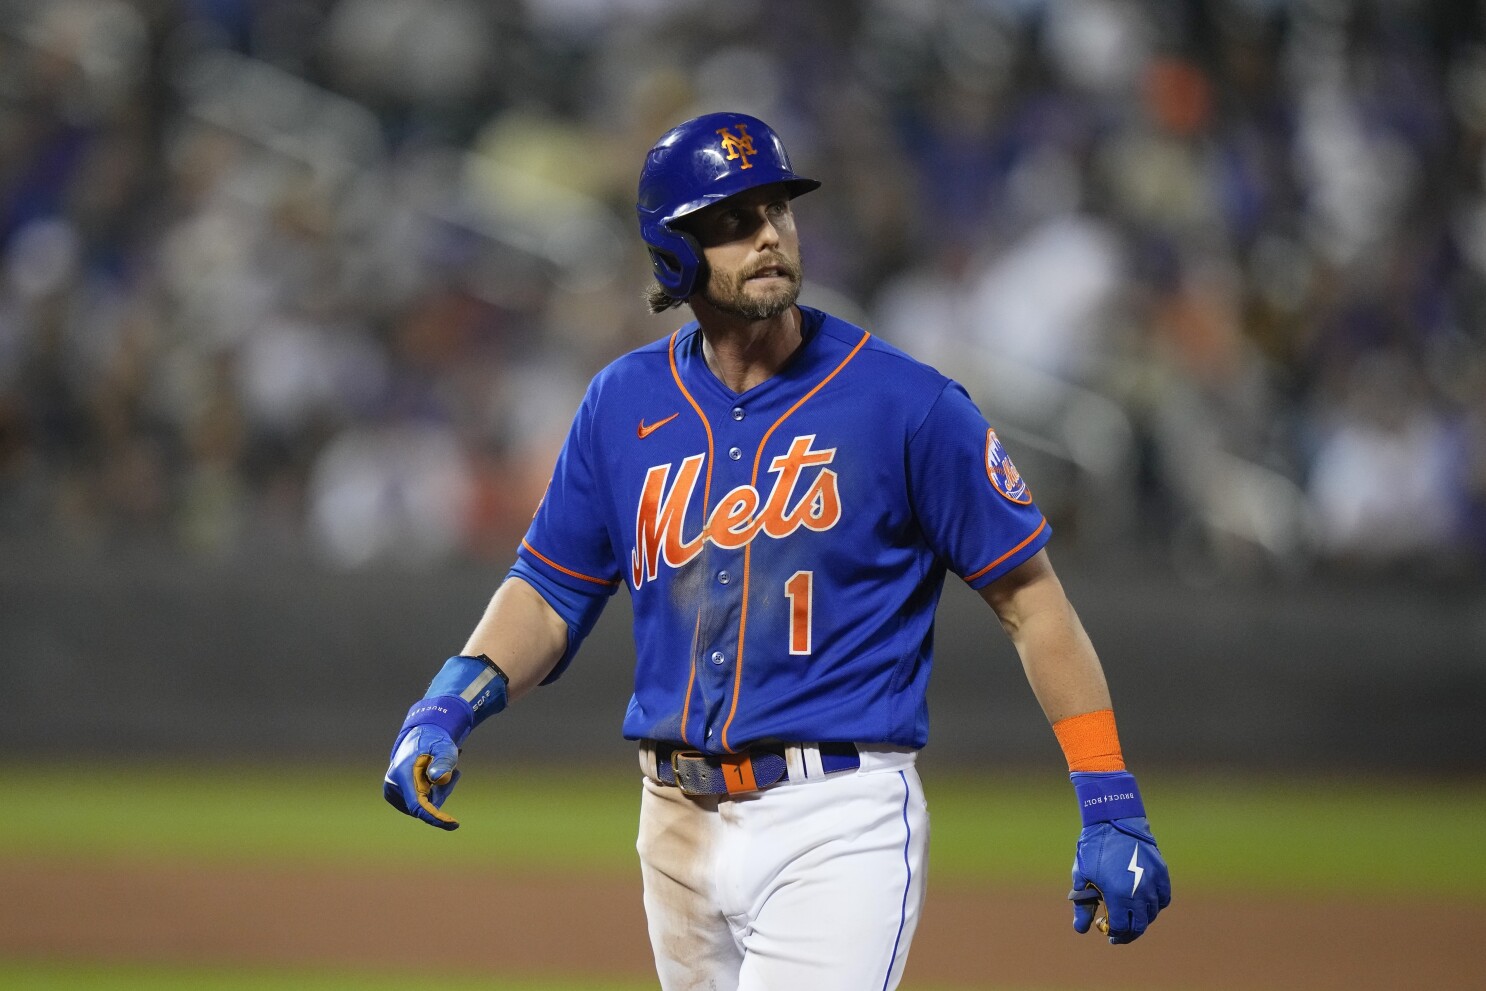 Mets fall season-high 9 games under .500, lose to Brewers 3-2 as Marte  strands bases loaded